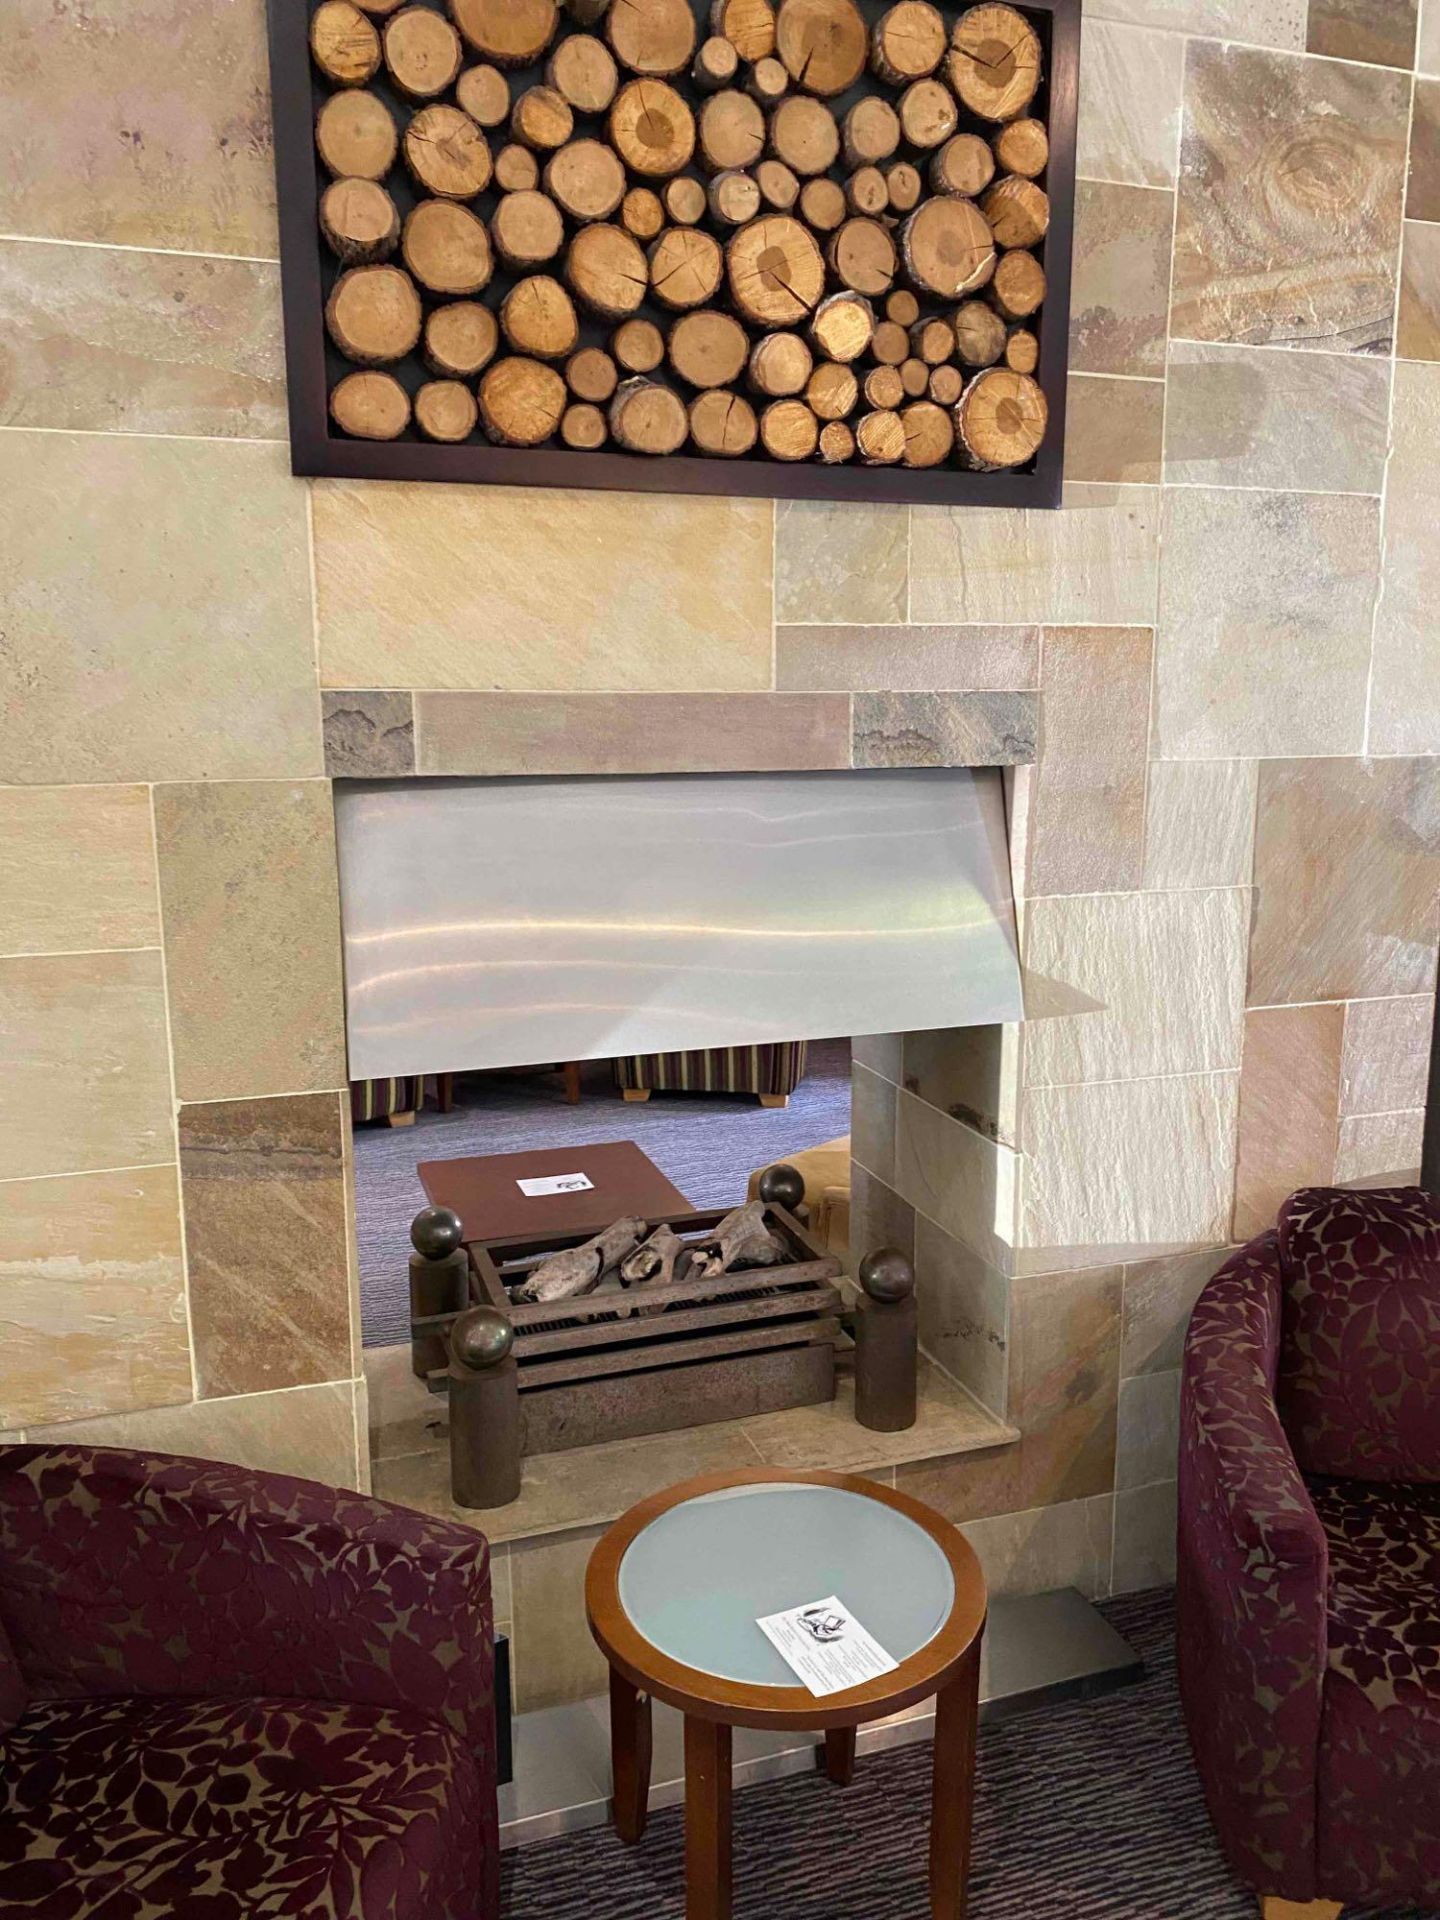 Gas Fire (Entire) 750 x 500 x 250 (The Lounge )